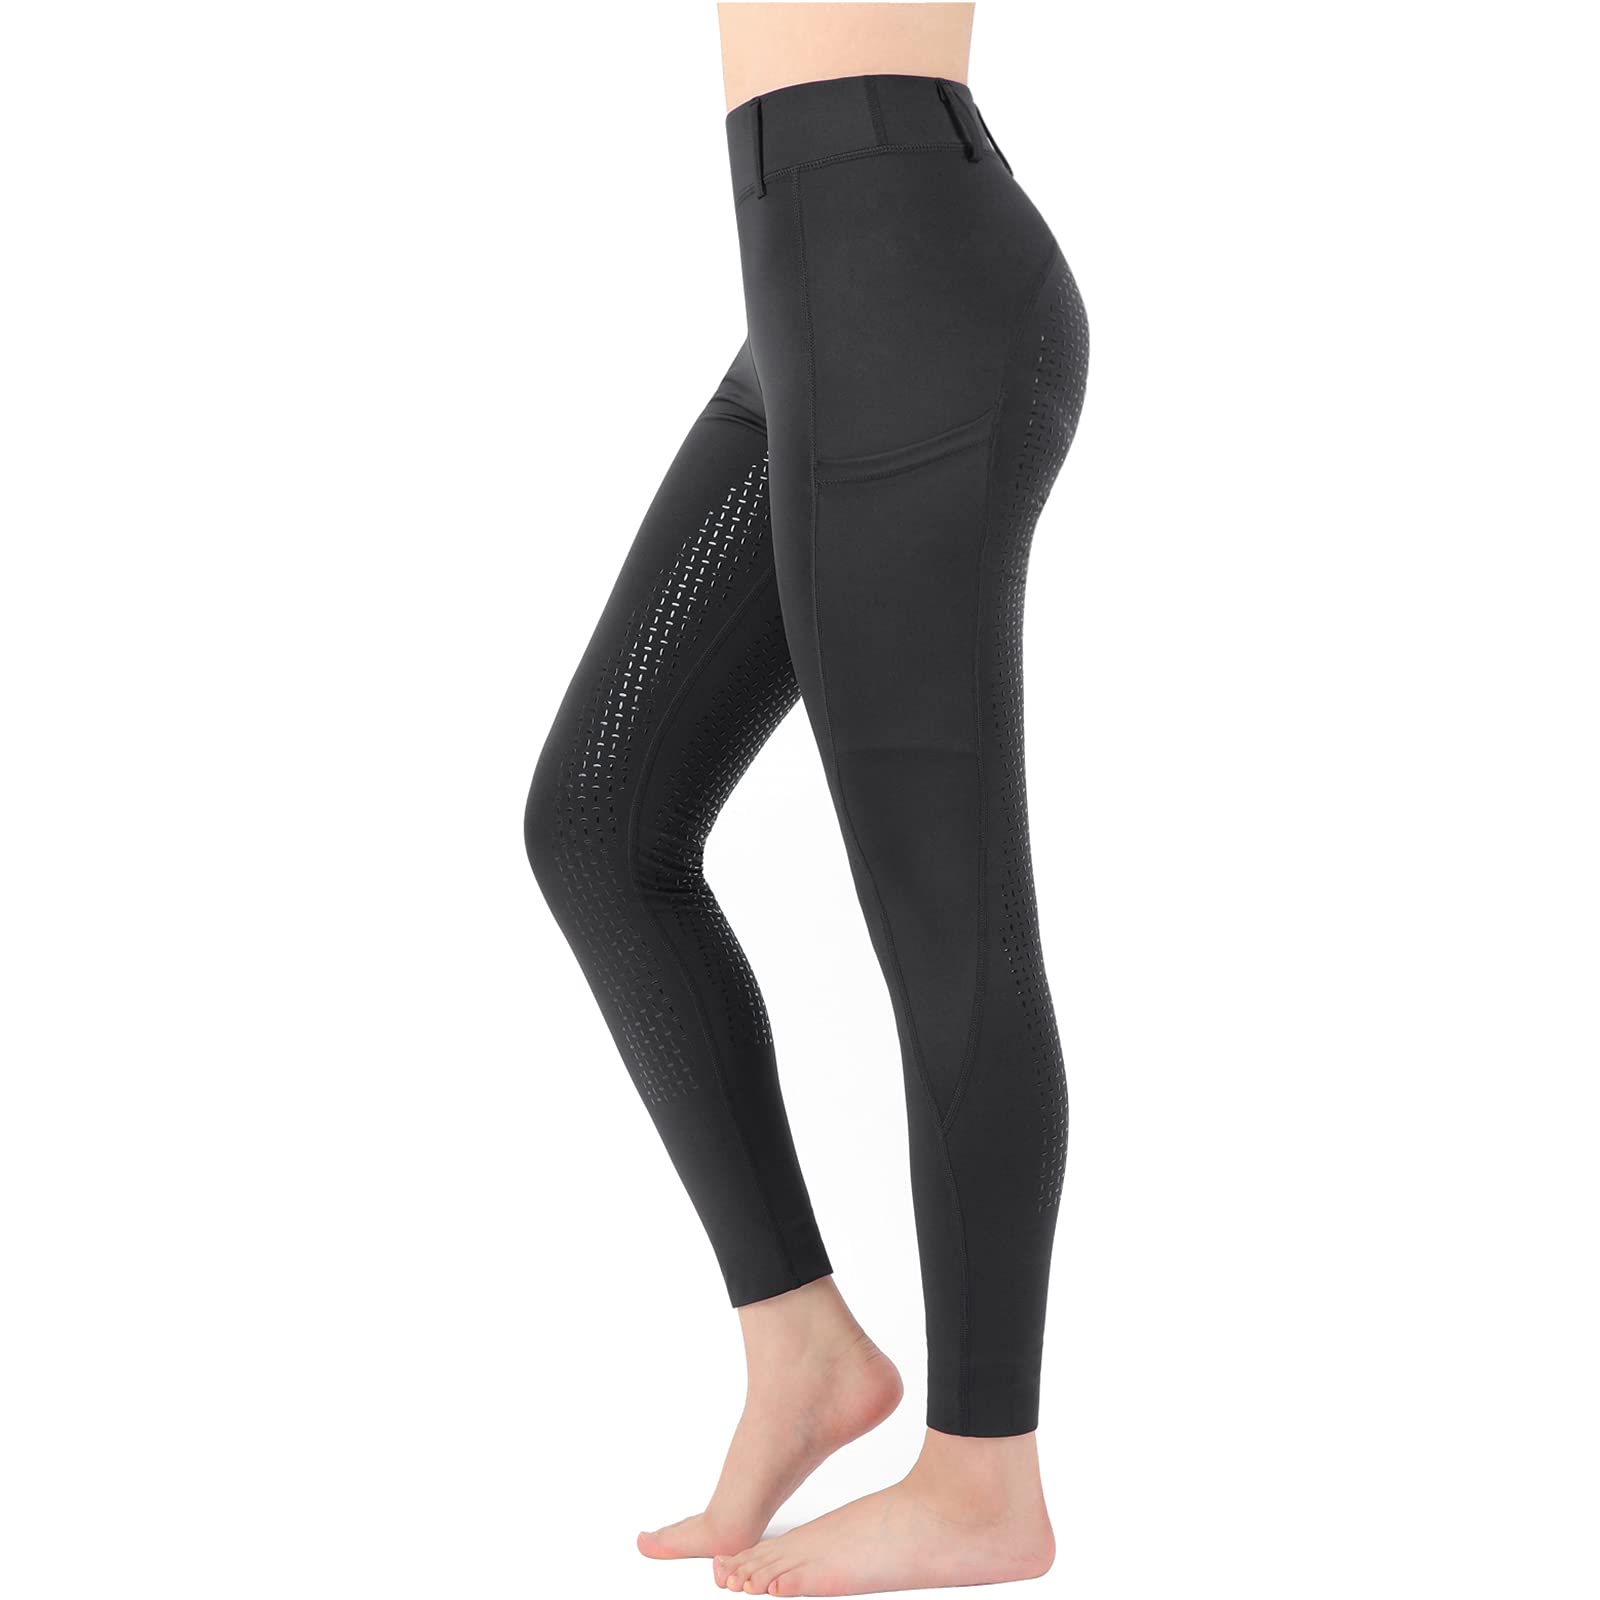 Women Riding Tights Pockets,Women Training Breeches Pants with